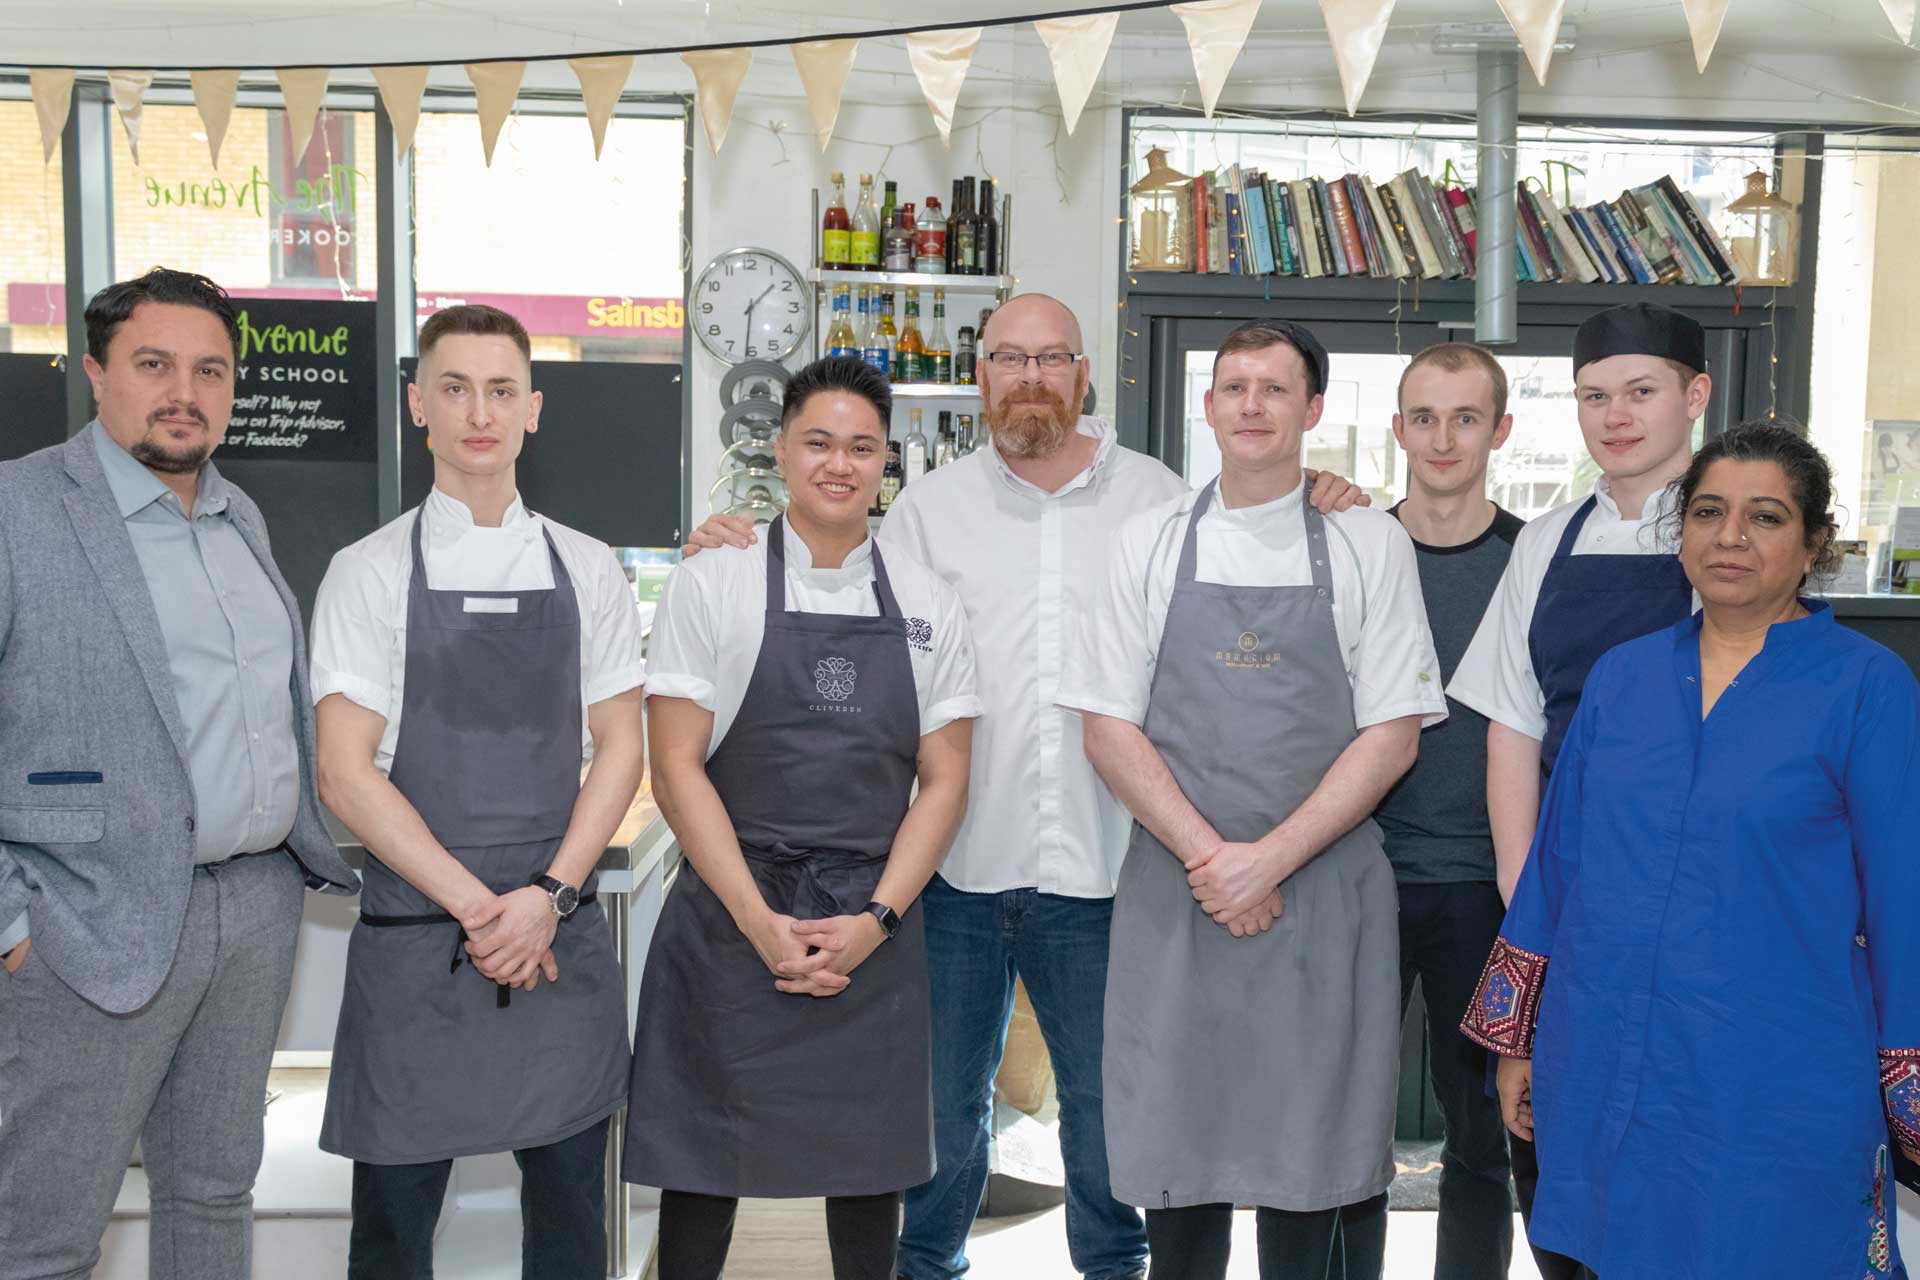 Finalists and judges at the 2019 Steelite UK Rising Star Hotel Chef Competition